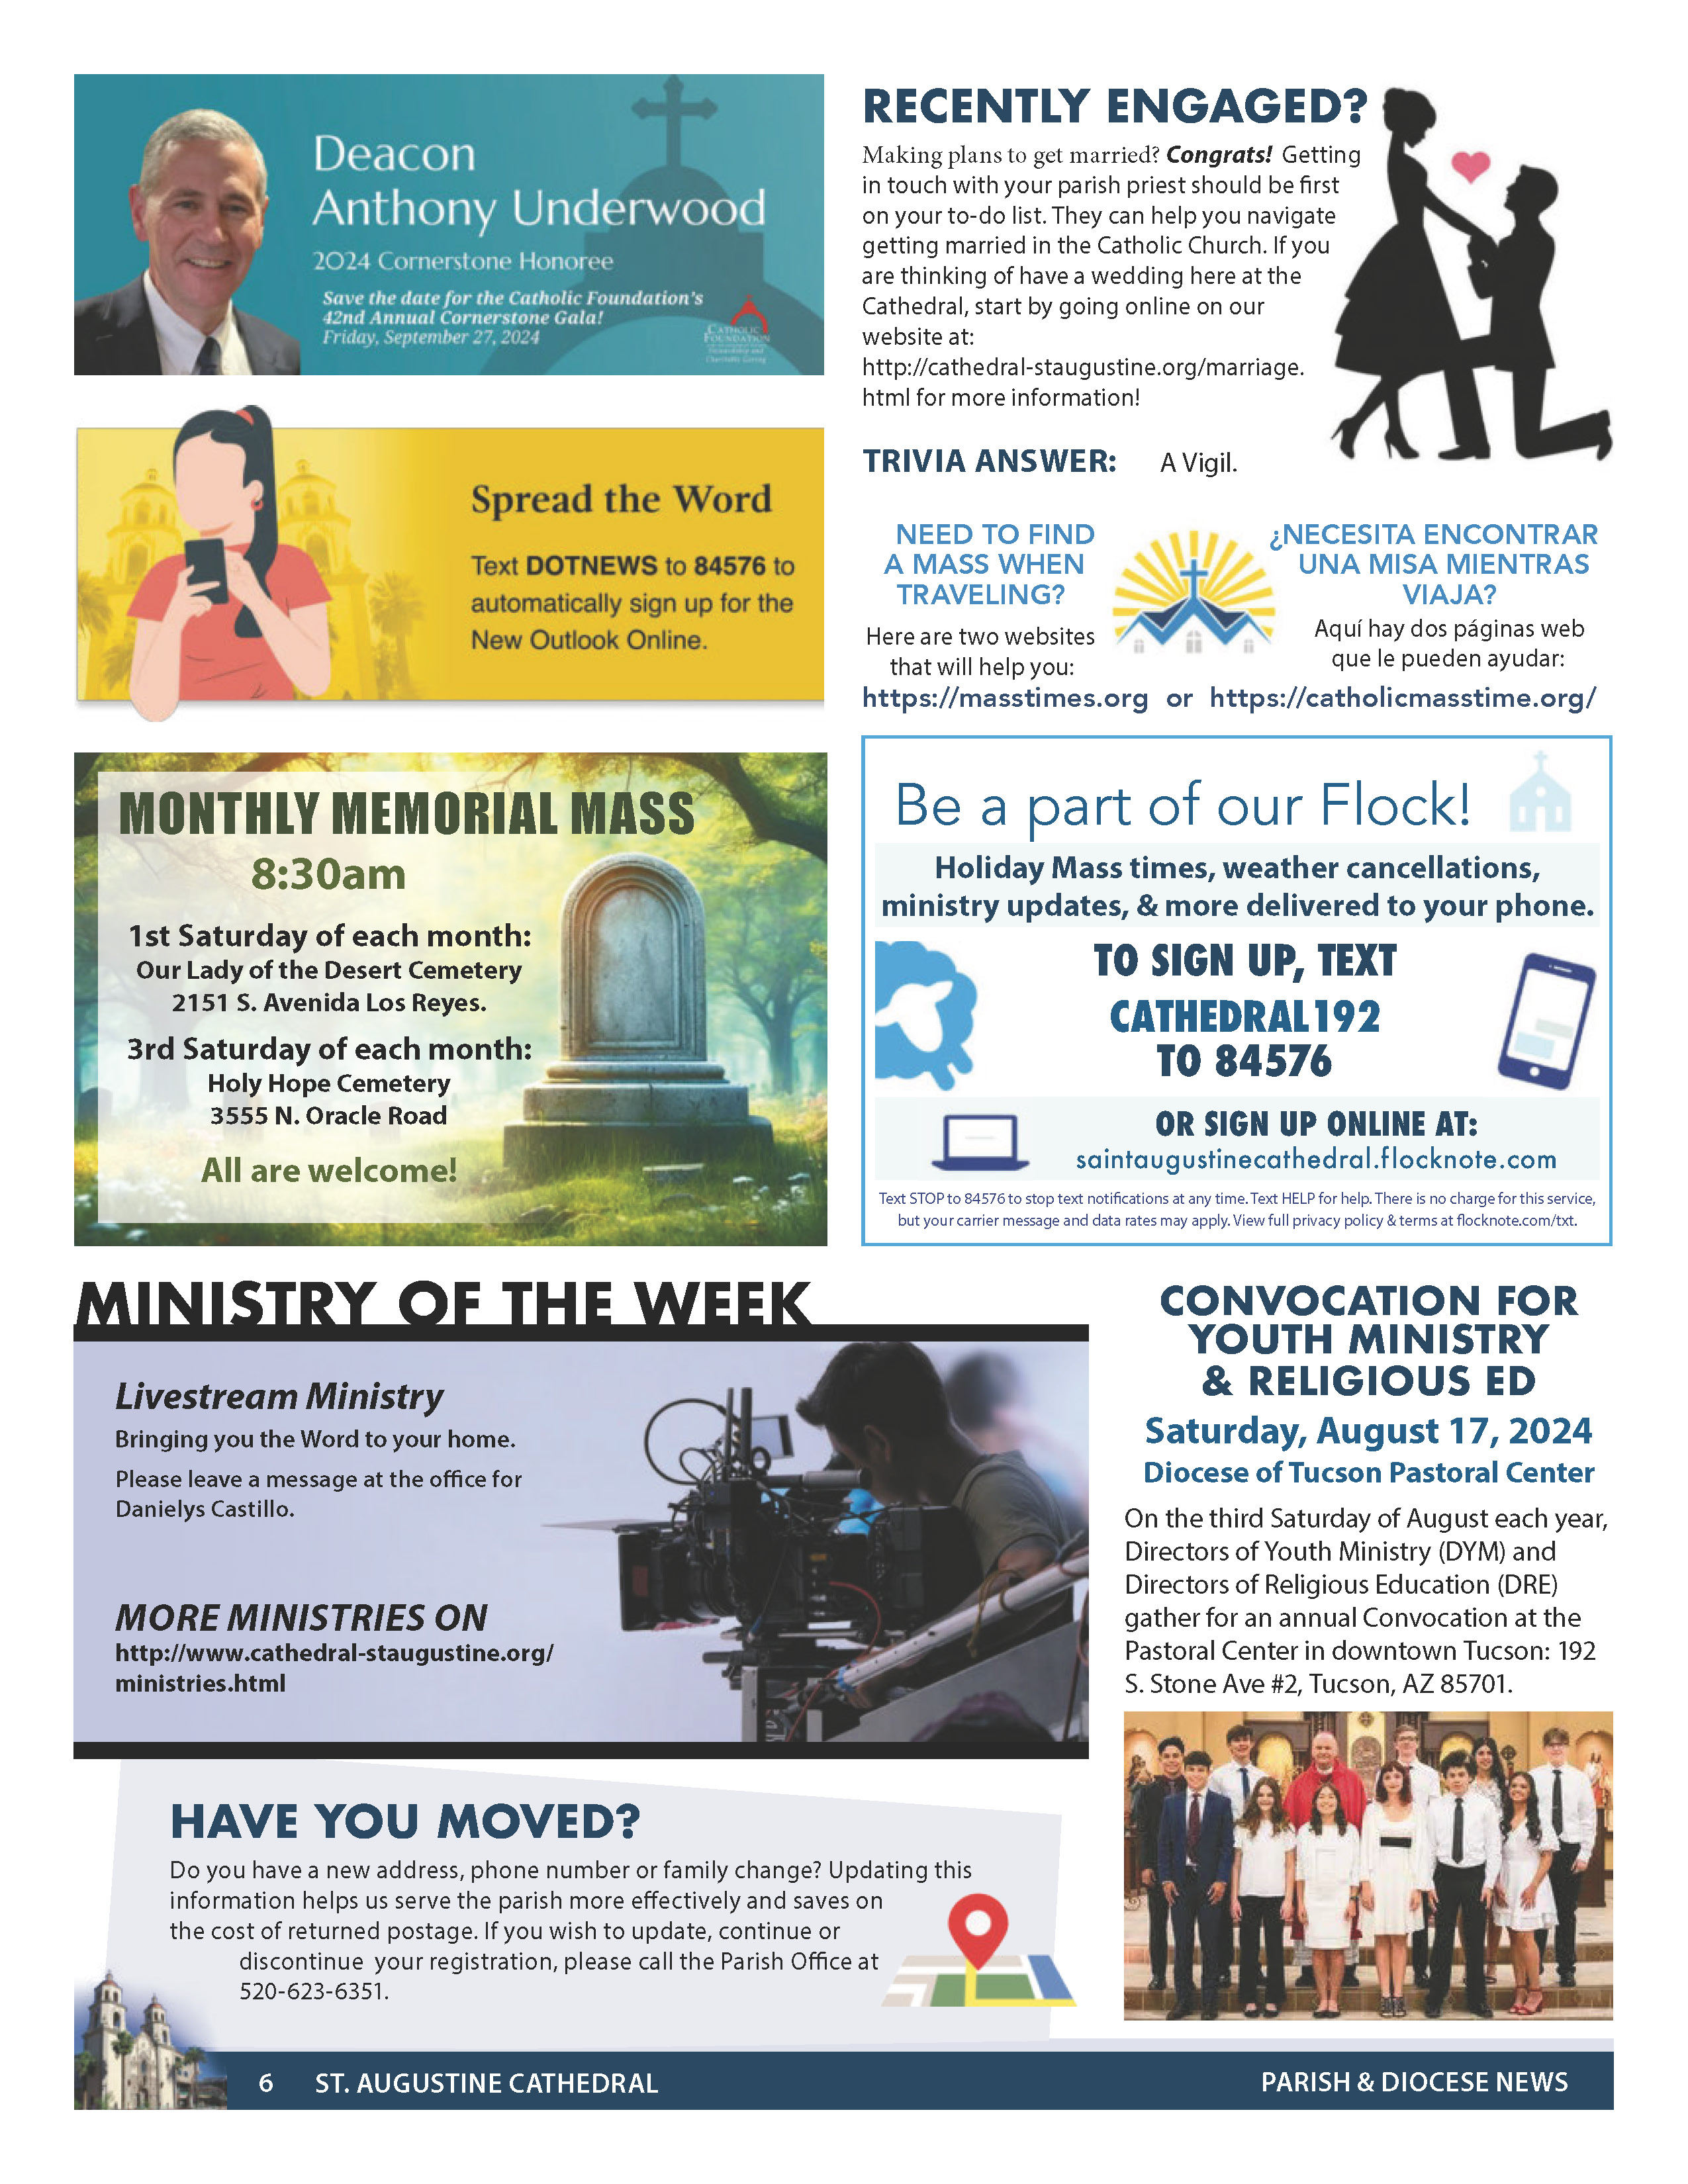 St. Augustine Cathedral Tucson Bulletin page 6